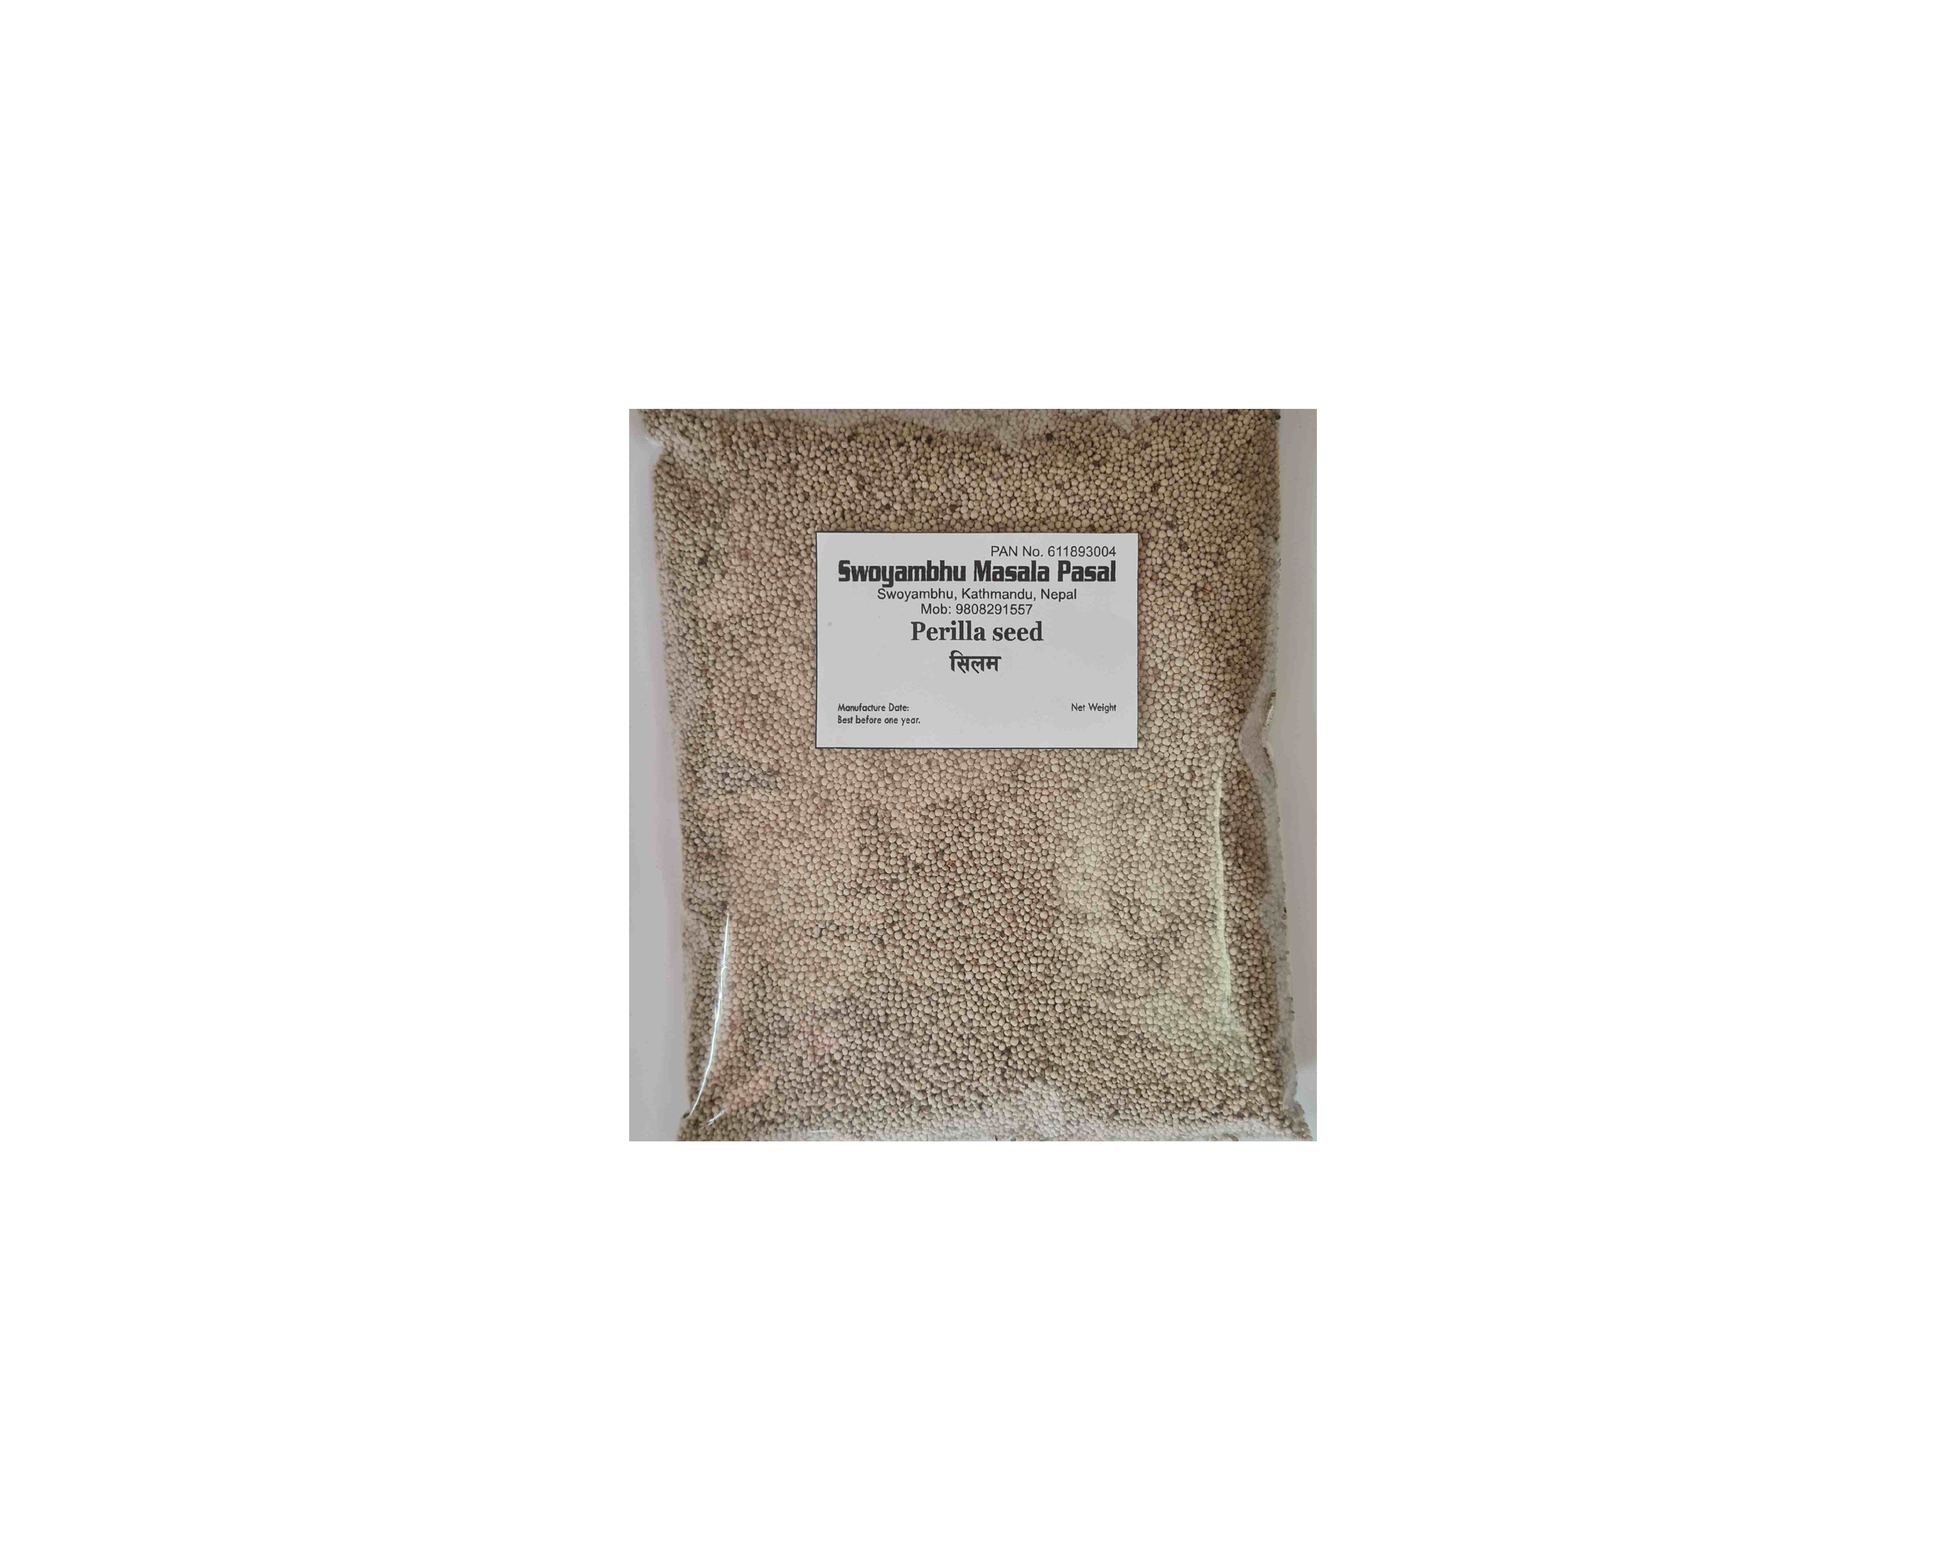 Silam 100g - Indian Spices